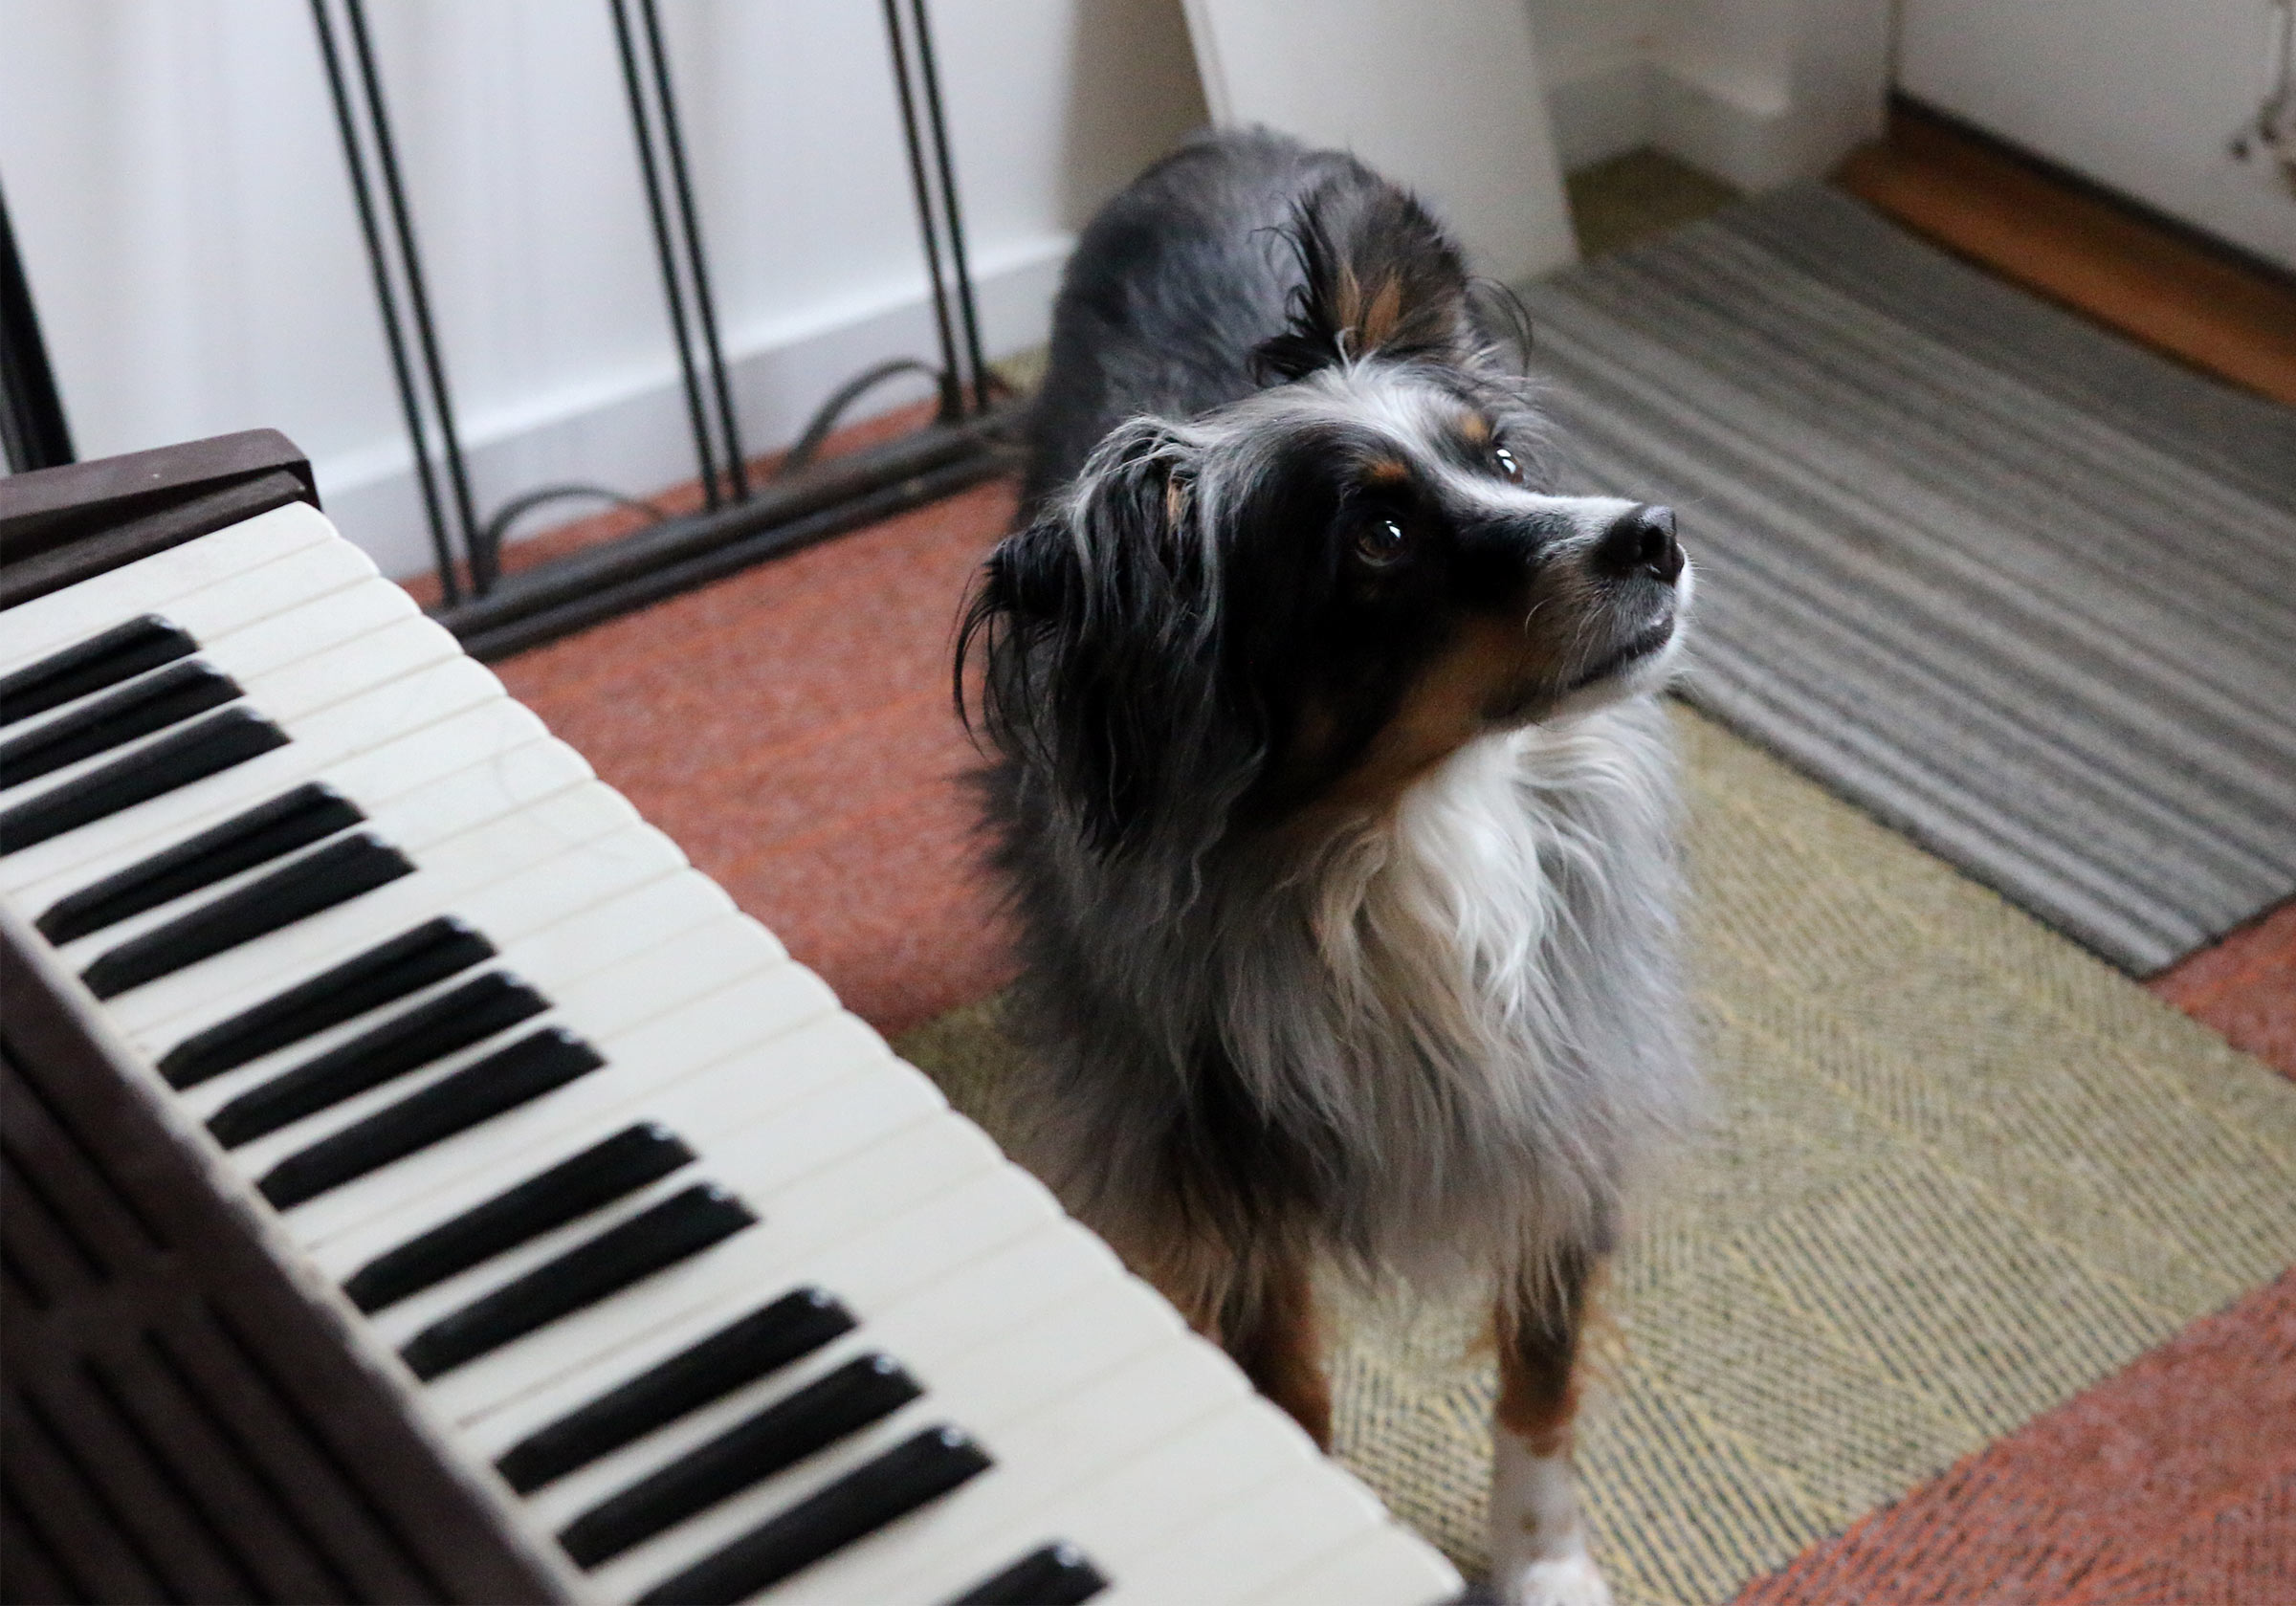 Schumacher's very attentive dog near one of his electric keyboards.